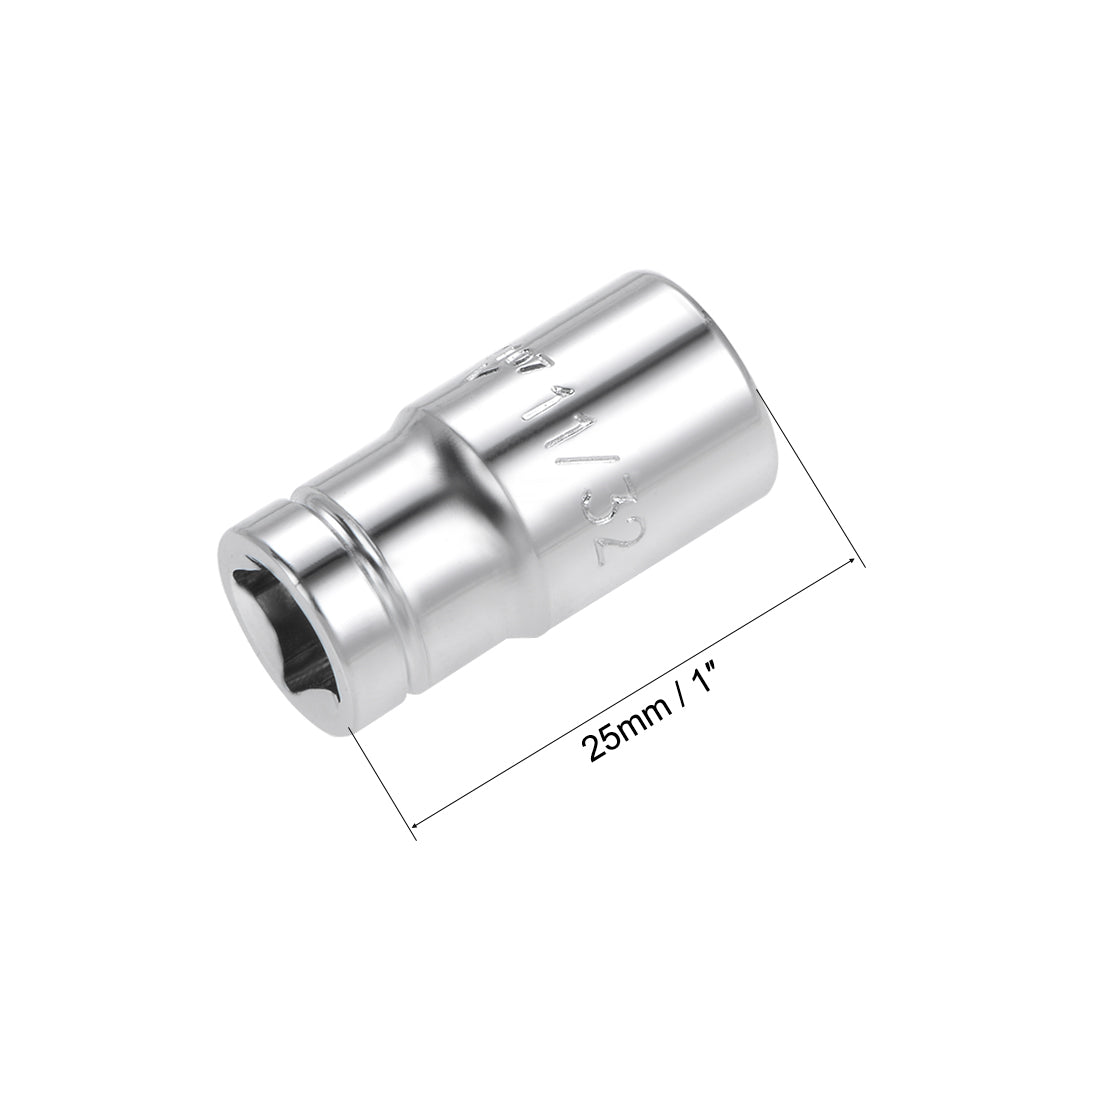 uxcell Uxcell Square Drive SAE 6-Point Shallow Socket Kit, Cr-V Steel